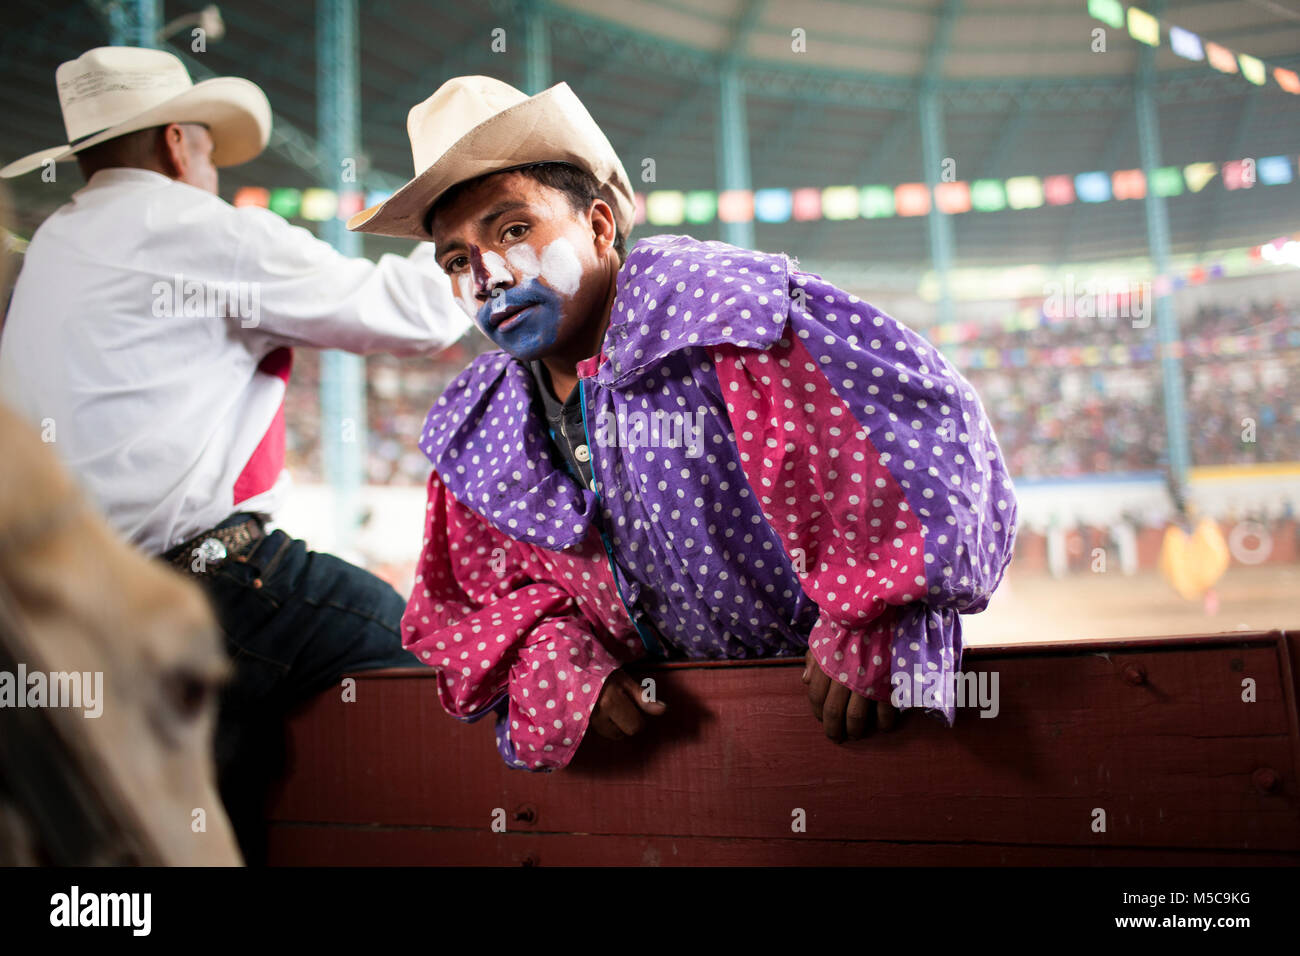 A rodeo clown during the fall fiesta rodeo in Cheran, Michoacan, Mexico on Tuesday, October 7, 2014. The town of Cheran holds two annual fiestas to celebrate their culture and religious beliefs.   In April 2011, after years of extortion by the local cartels and complacency of local government and police, the people of Cheran reclaimed their town and their land. The Pueblo (translated as people or community) confronted the cartel, removed the government from office, and created their own police force to guard the city. Stock Photo